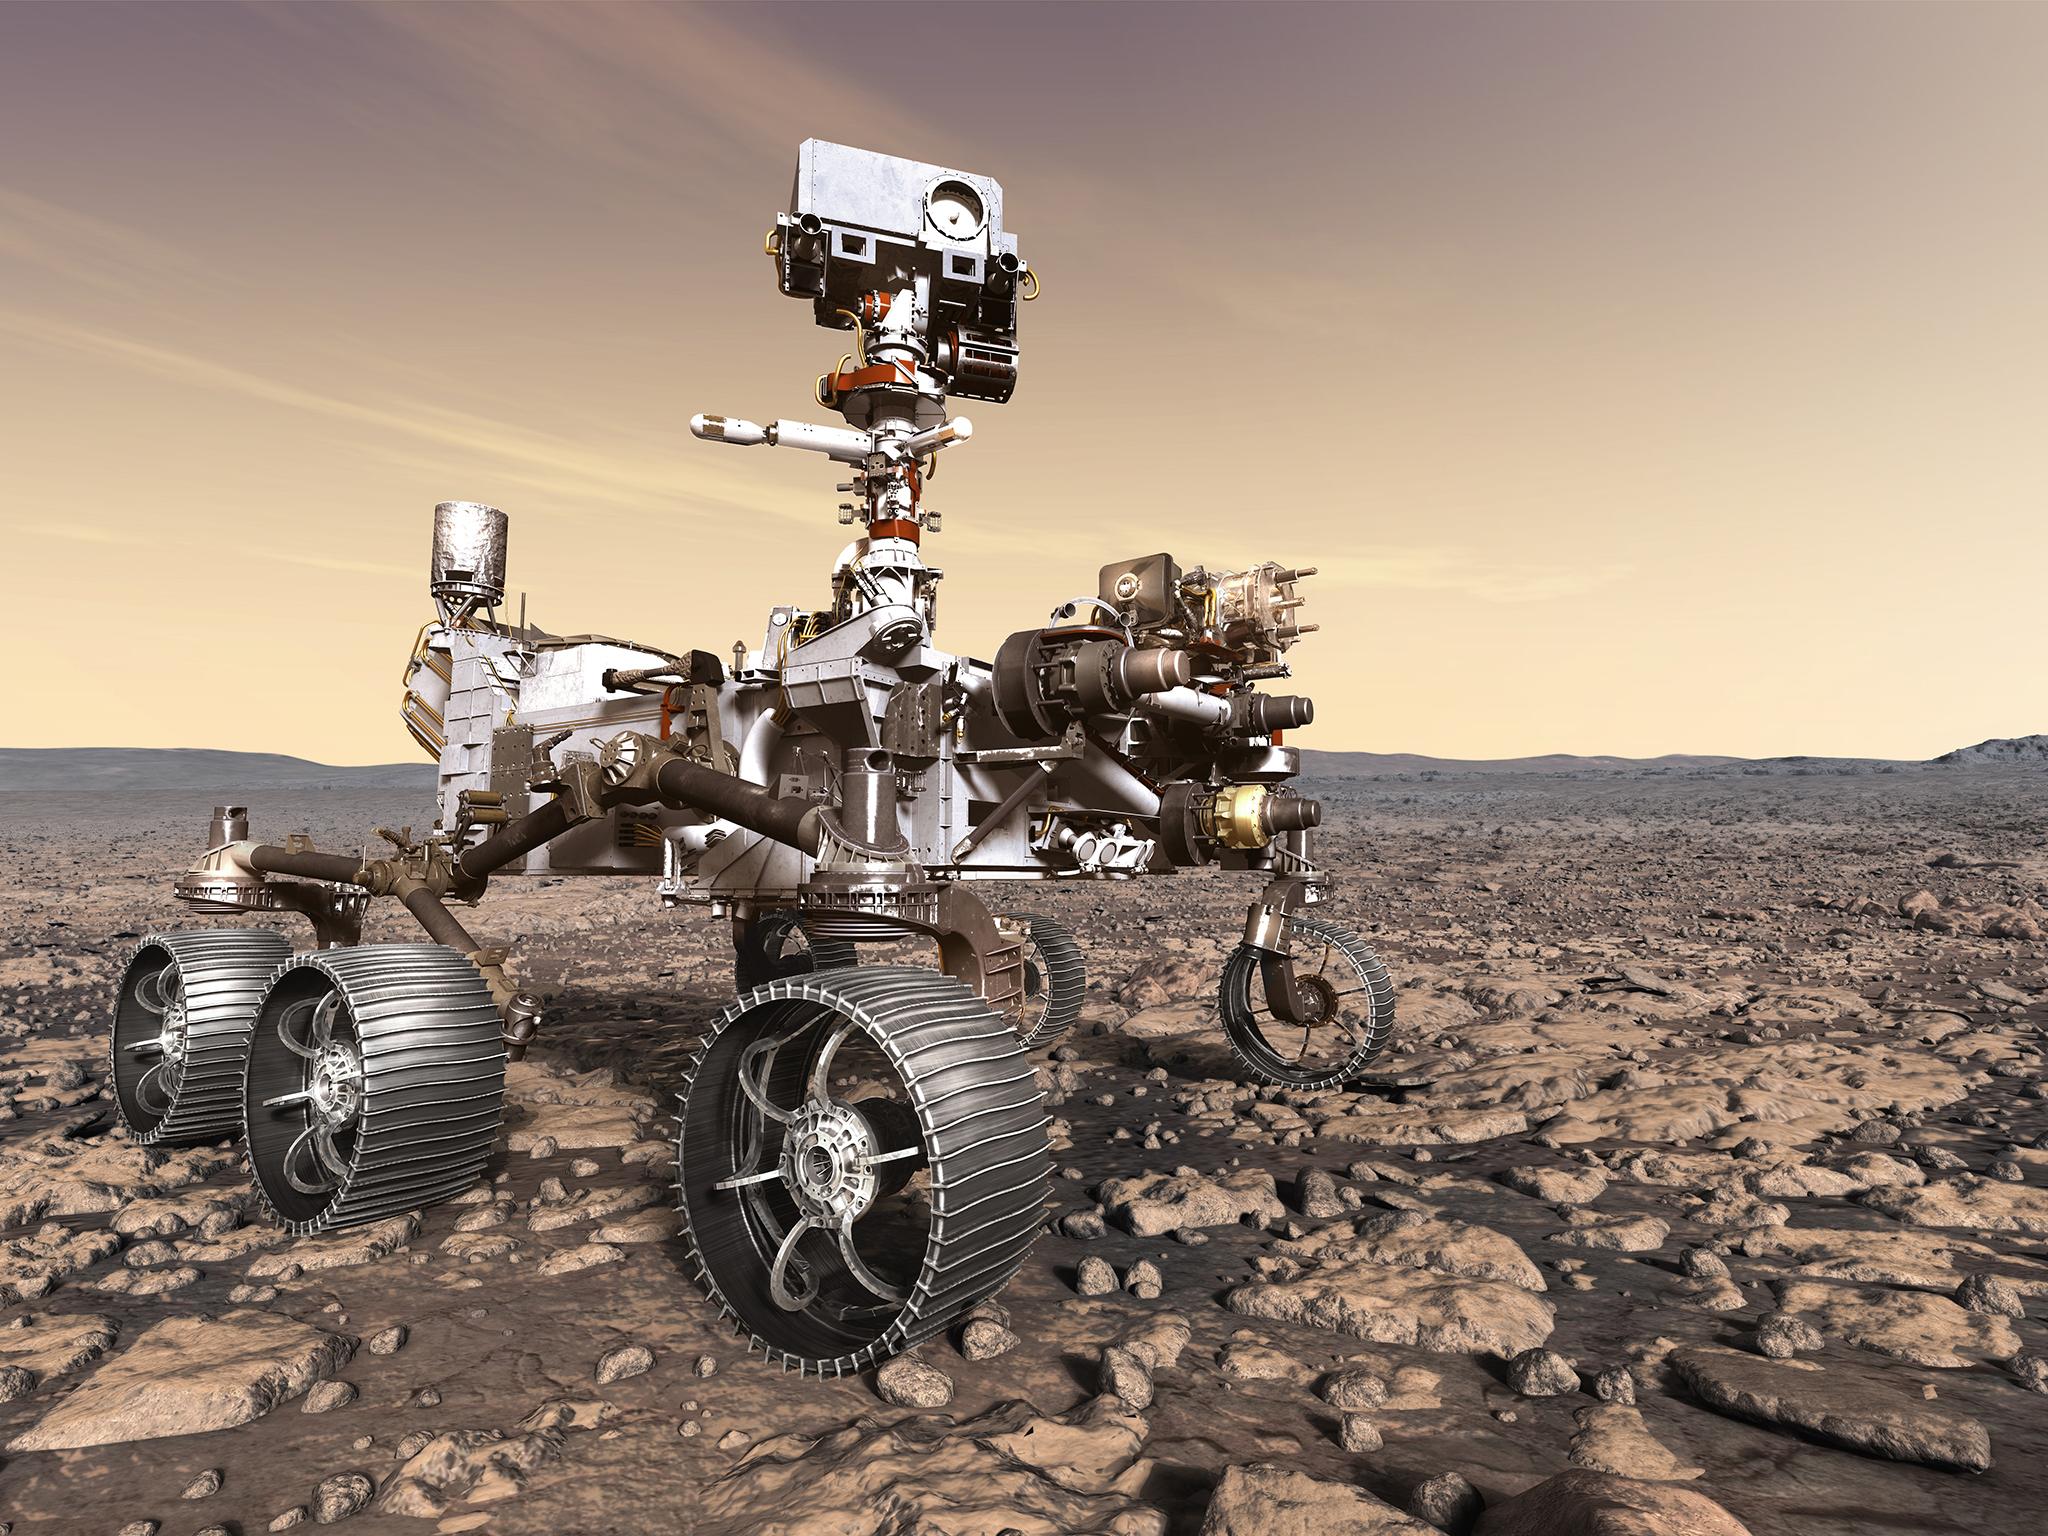 New Mars rover will visit perfect spot to find signs of life, says scientists - The Independent